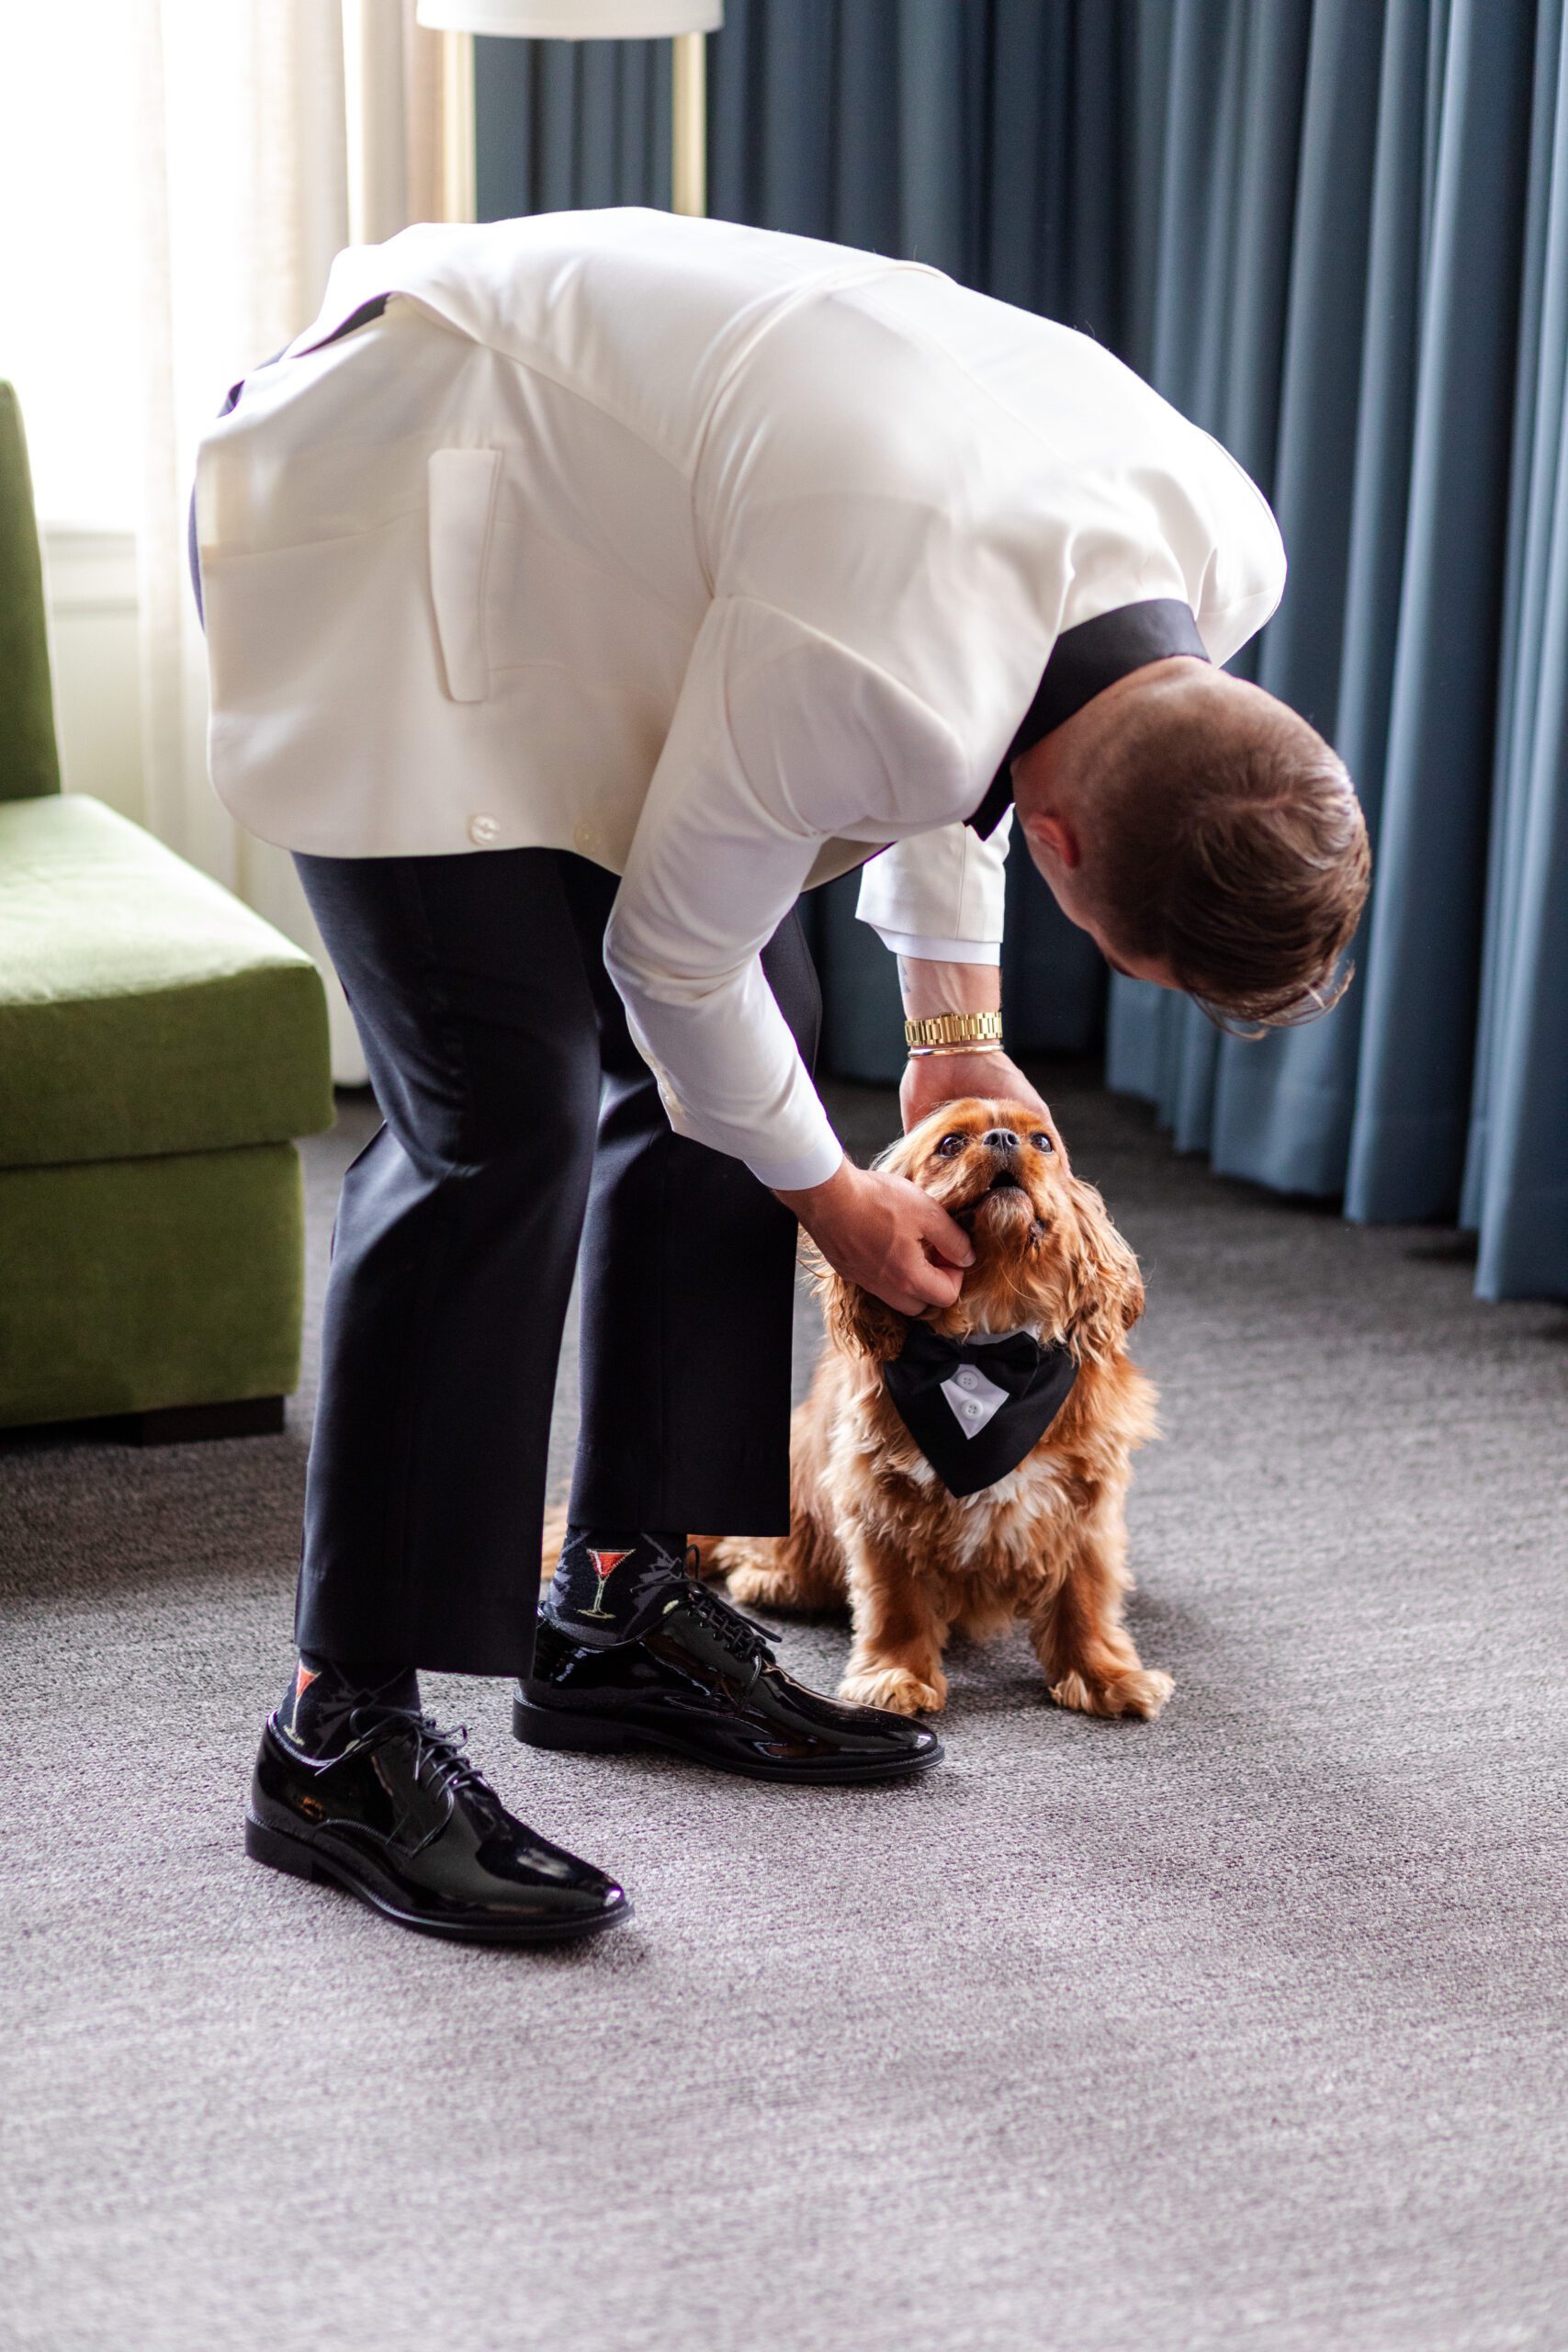 Groom putting best dog collar on dog for wedding, during getting ready at The Alexis Hotel.